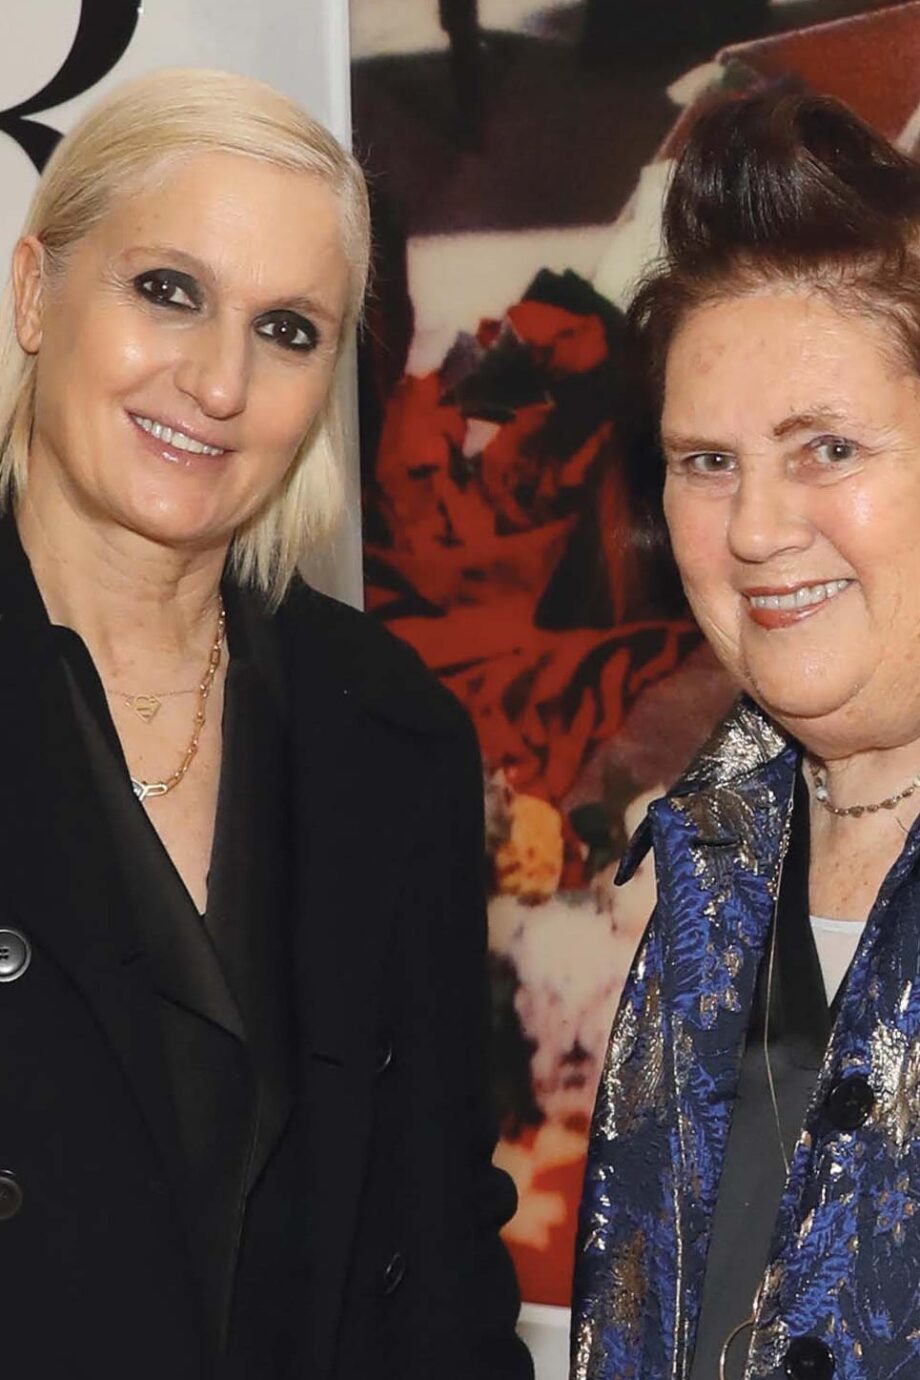 suzy-menkes-launches-the-creative-conversations-podcast-143765